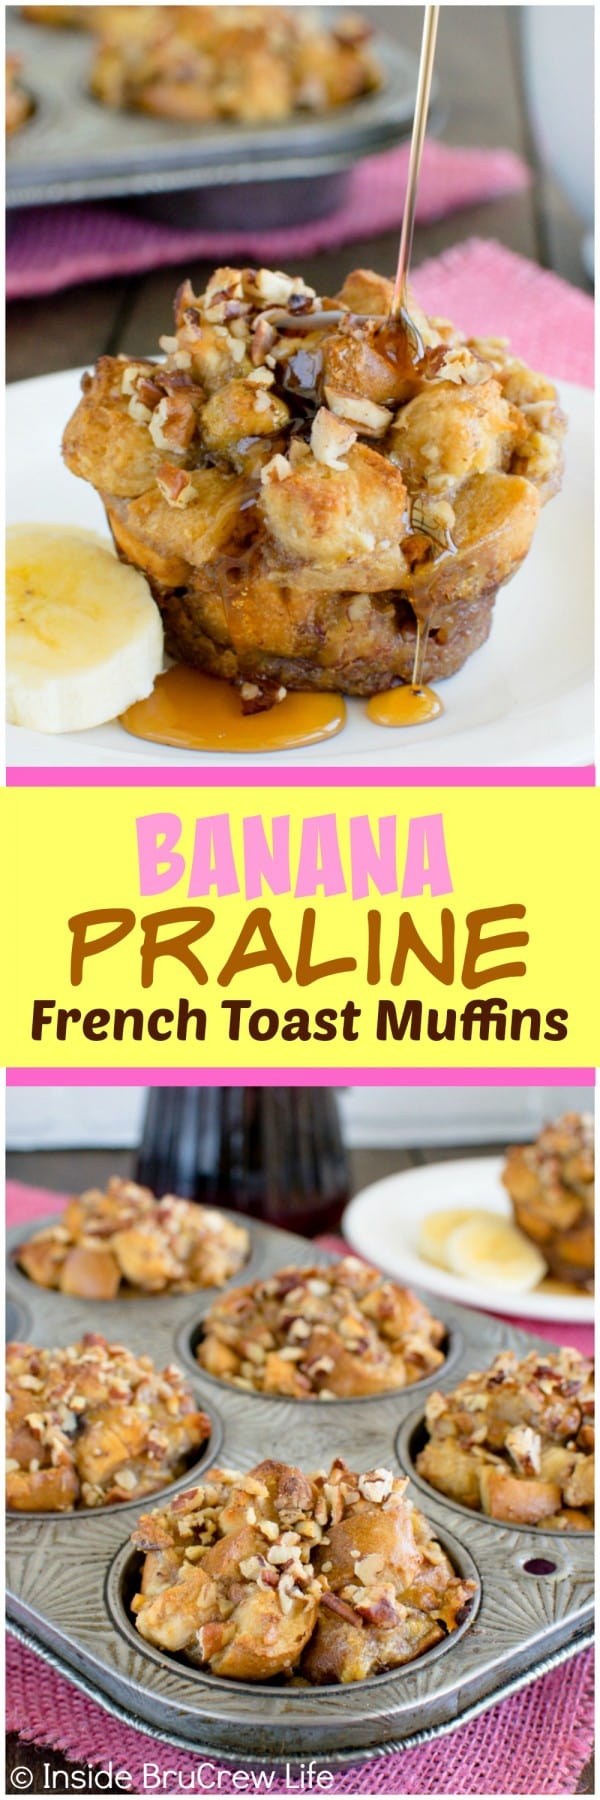 Banana Praline French Toast Muffins - these easy muffins are loaded with bananas and pecans. Great breakfast recipe!